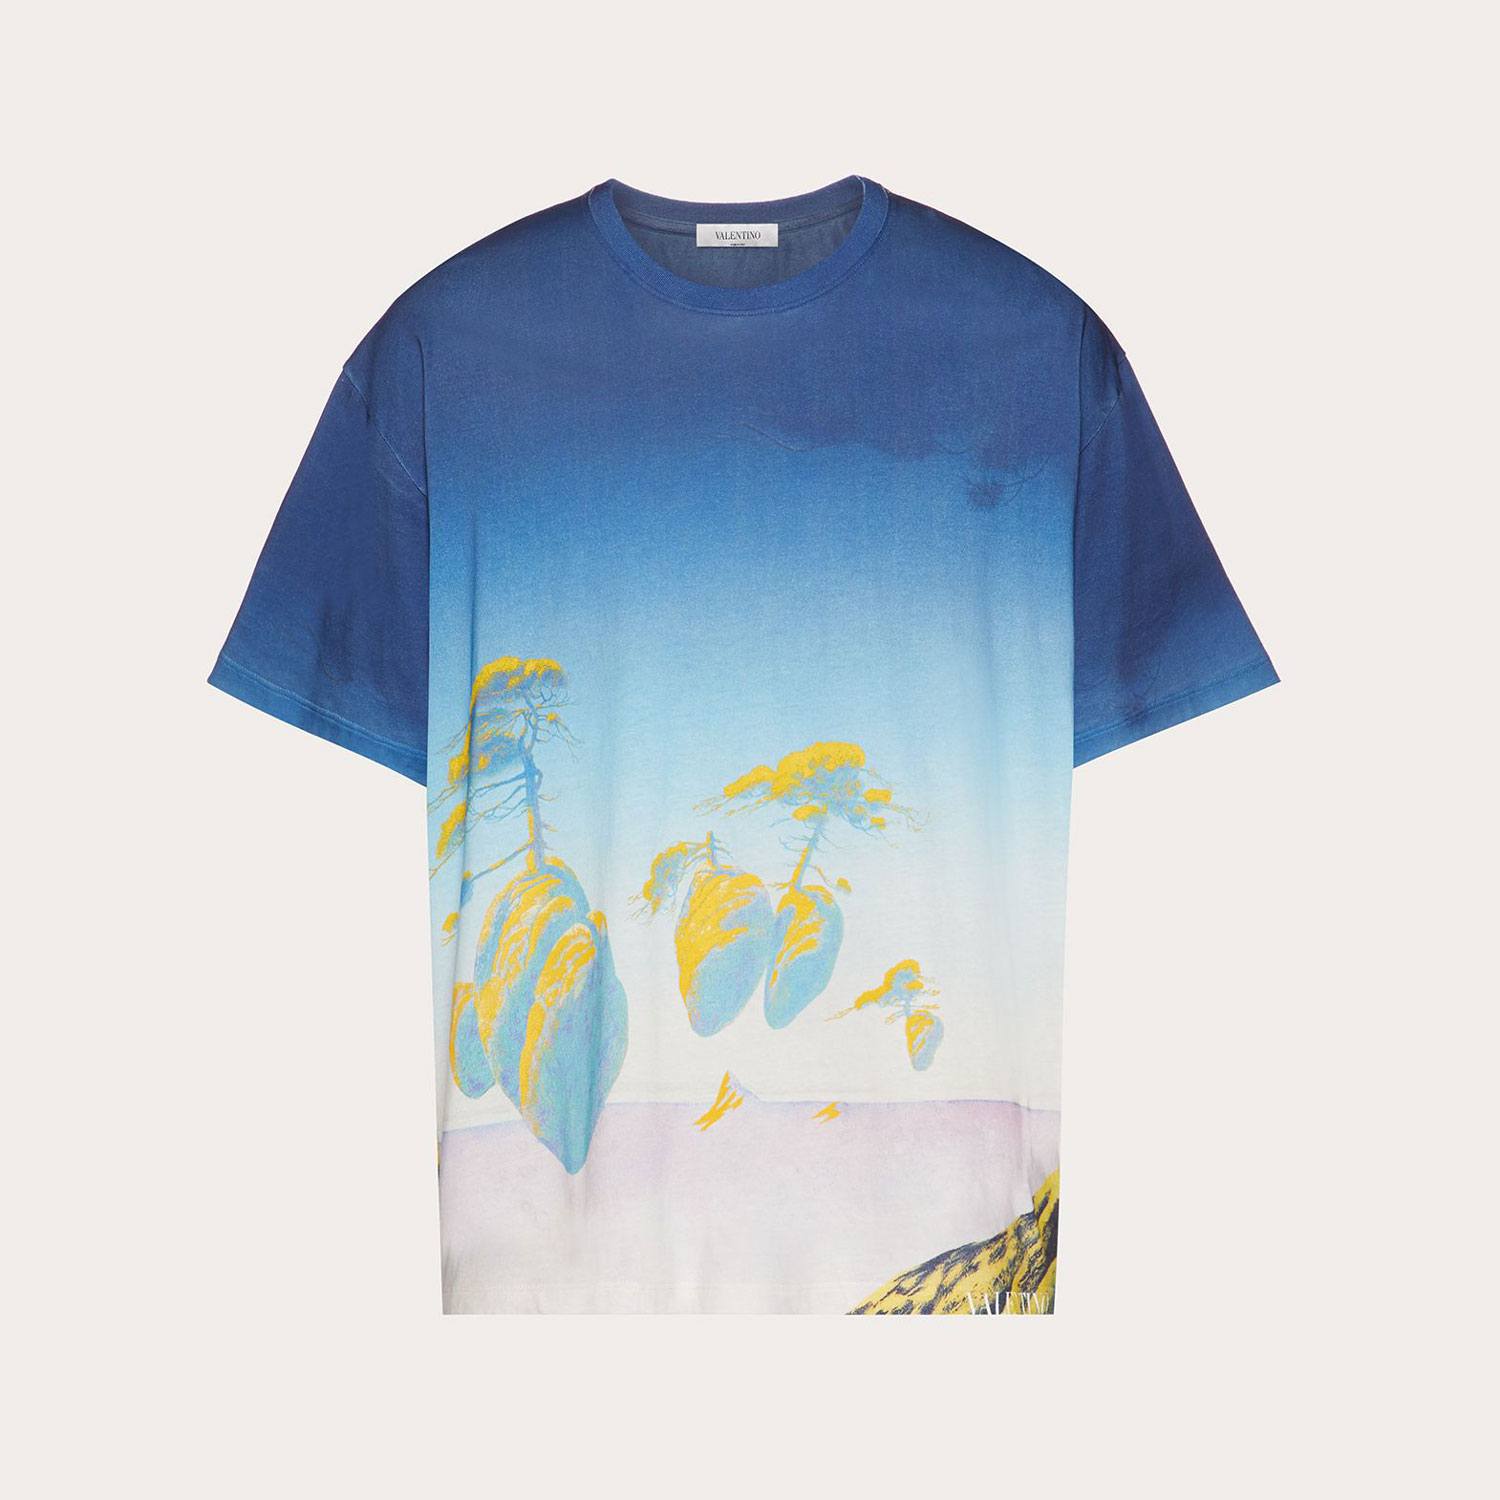 Roger Dean’s All-Over Florating Island T-shirt for Valentino.